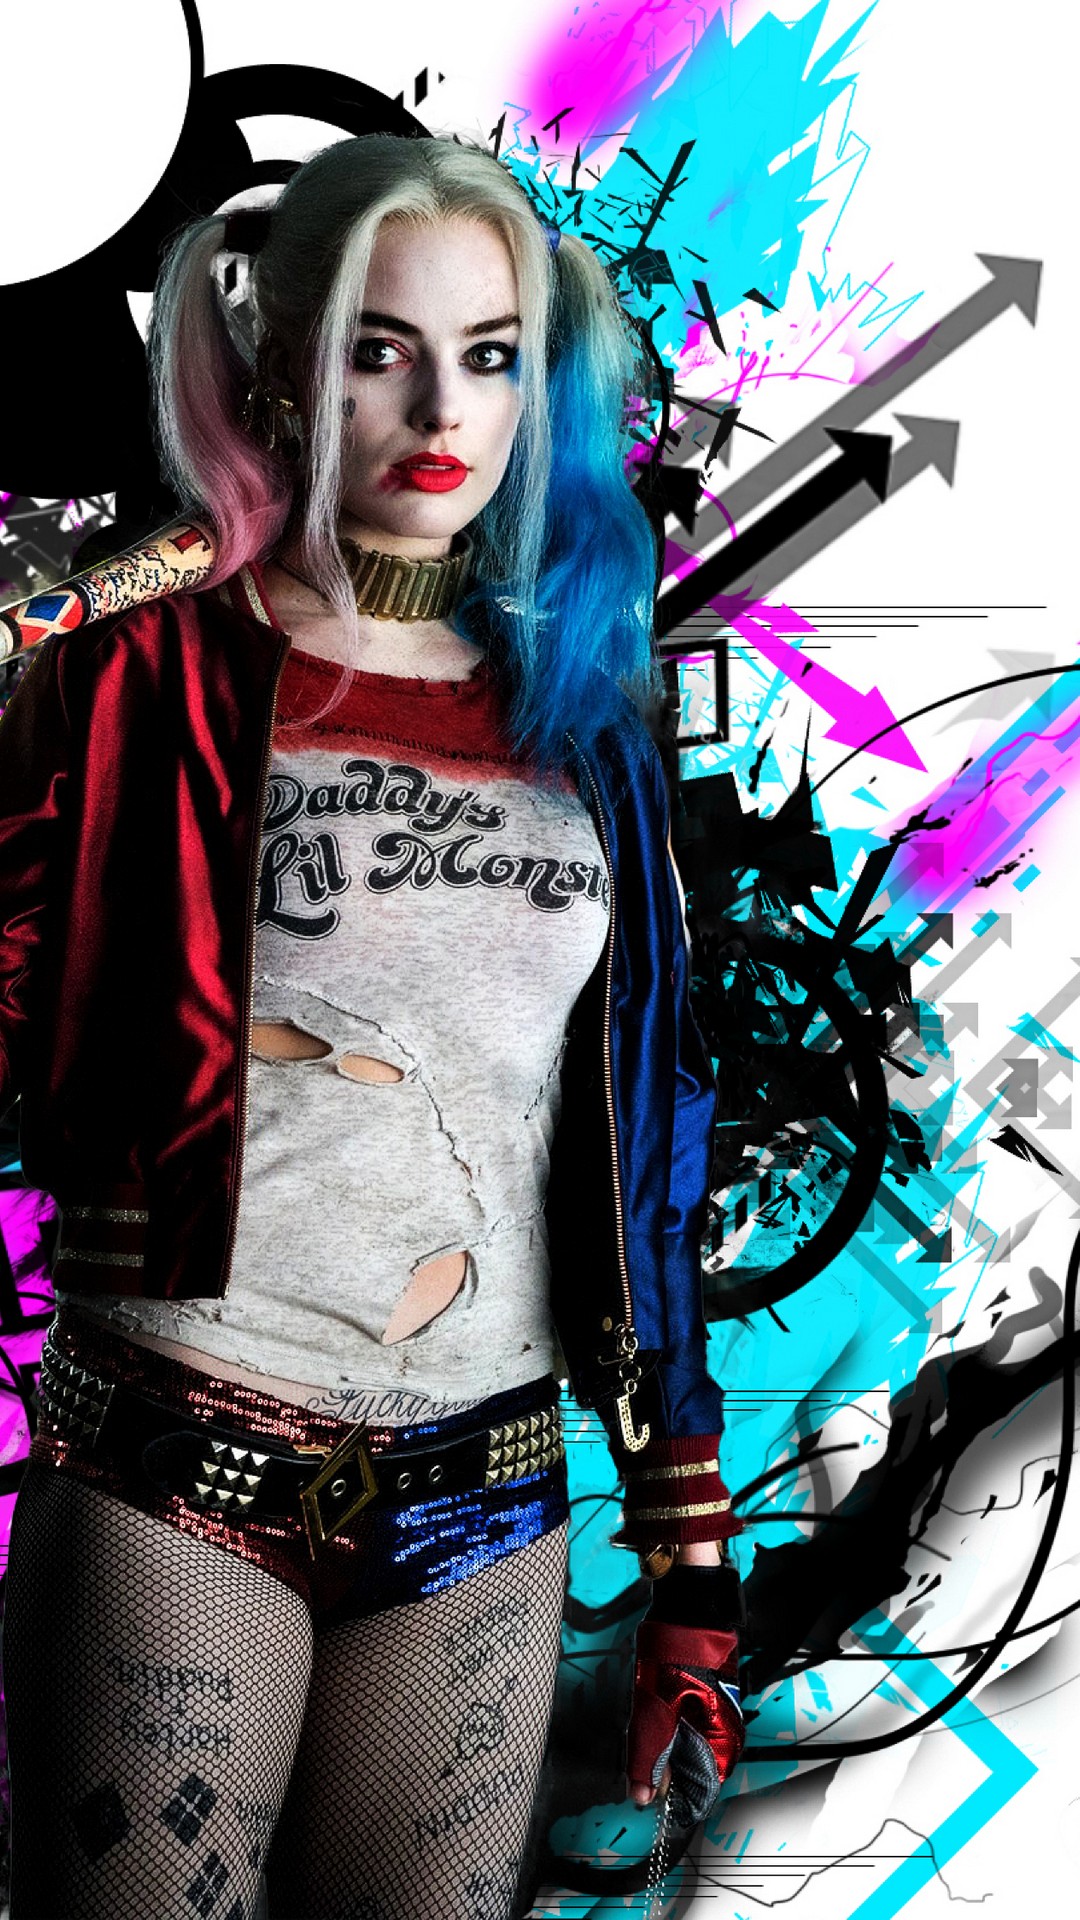 Harley Quinn Pictures Hd Wallpaper For Iphone With - Harley Quinn Hd Wallpaper For Mobile - HD Wallpaper 